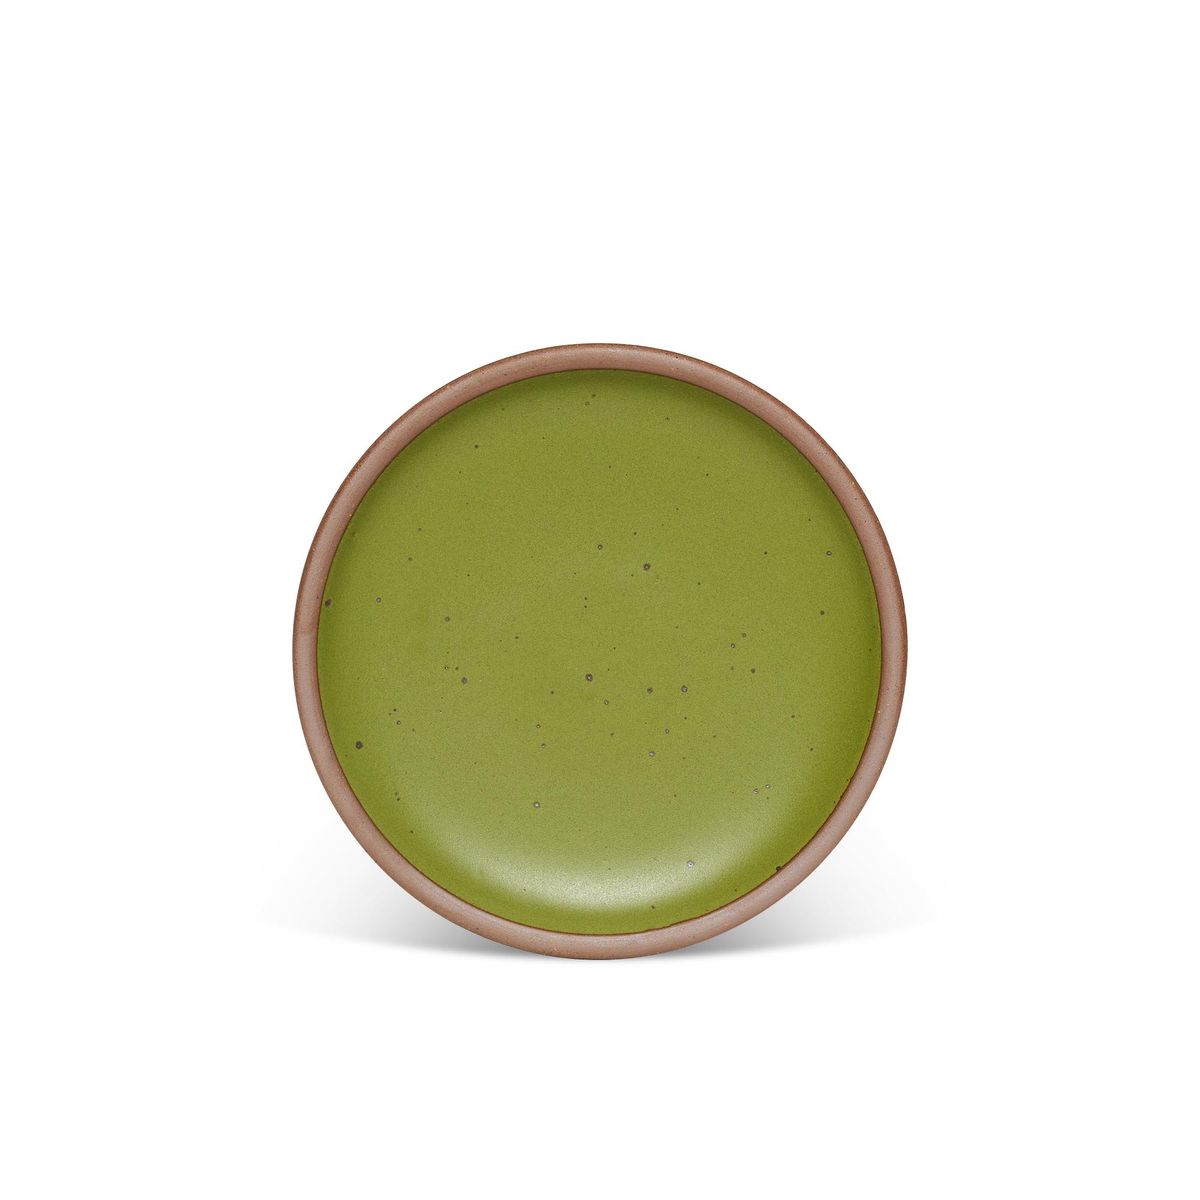 Side Plate in Fiddlehead, a mossy, olive green.